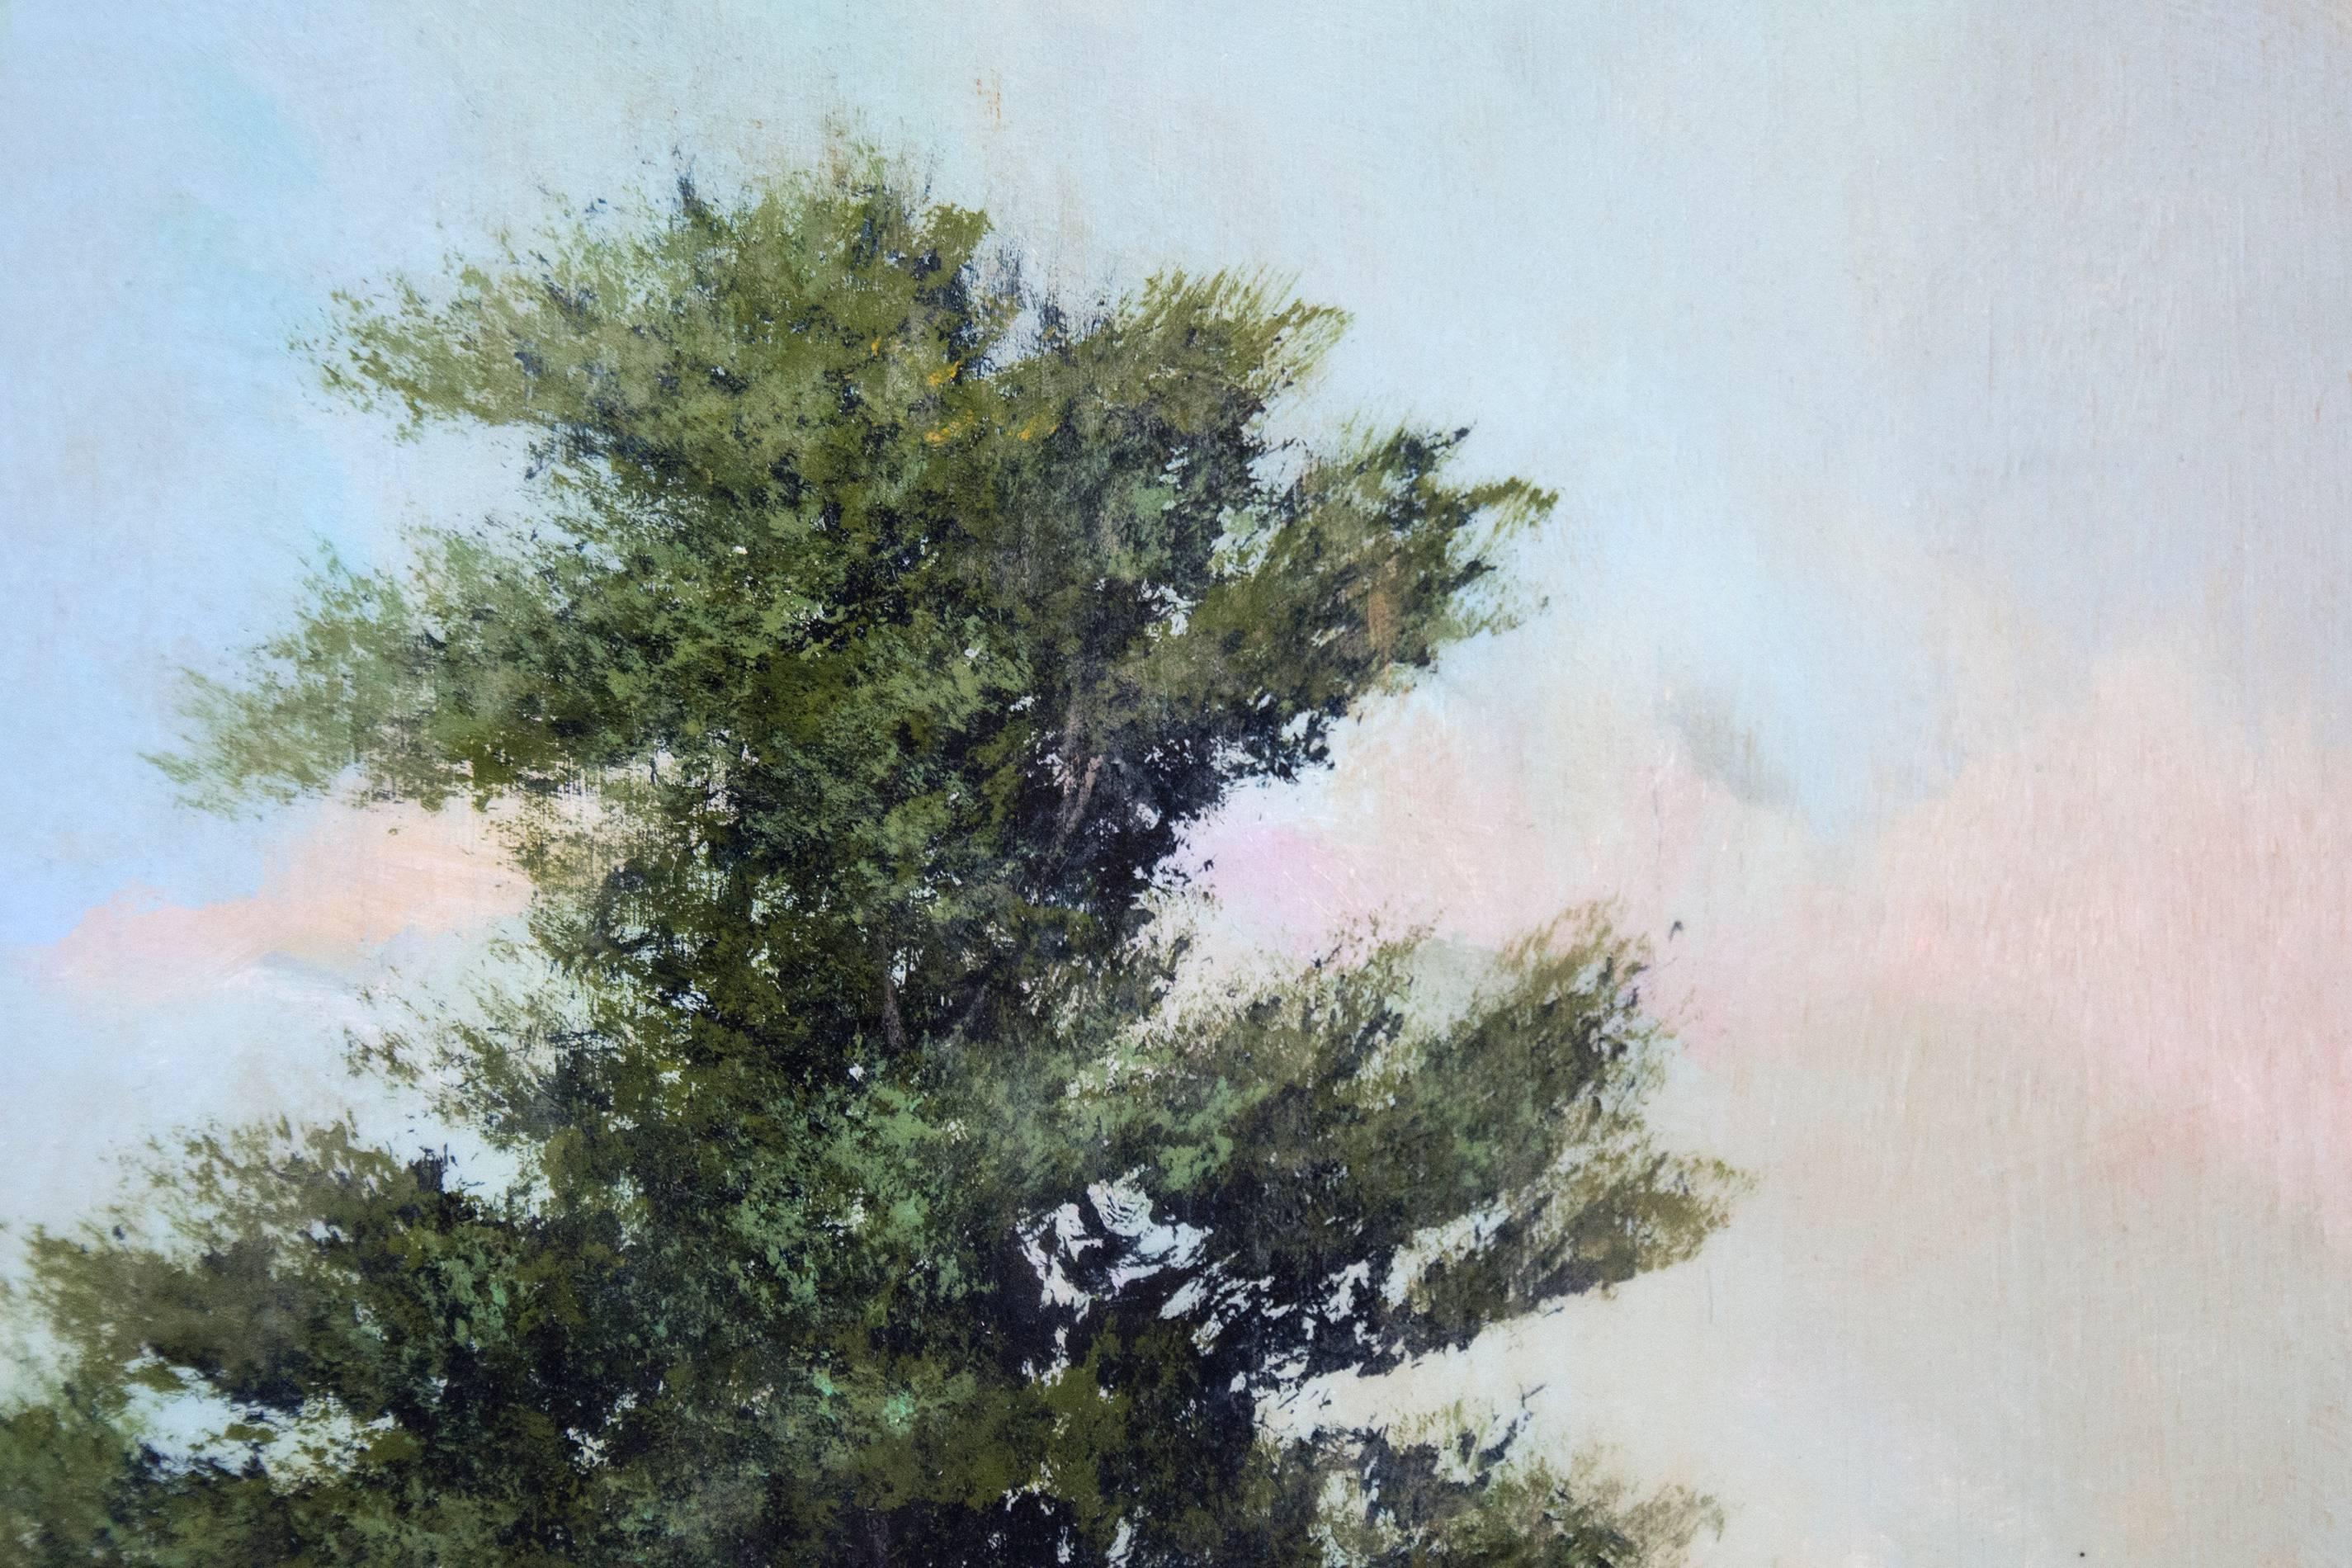 An iconic young cedar is set against the epic backdrop of a sweeping landscape with distant hills. Peter Hoffer's paintings evoke nostalgia for classical, romantic forms and periods. Here he seems to look to the expansive and romantic sublime in the